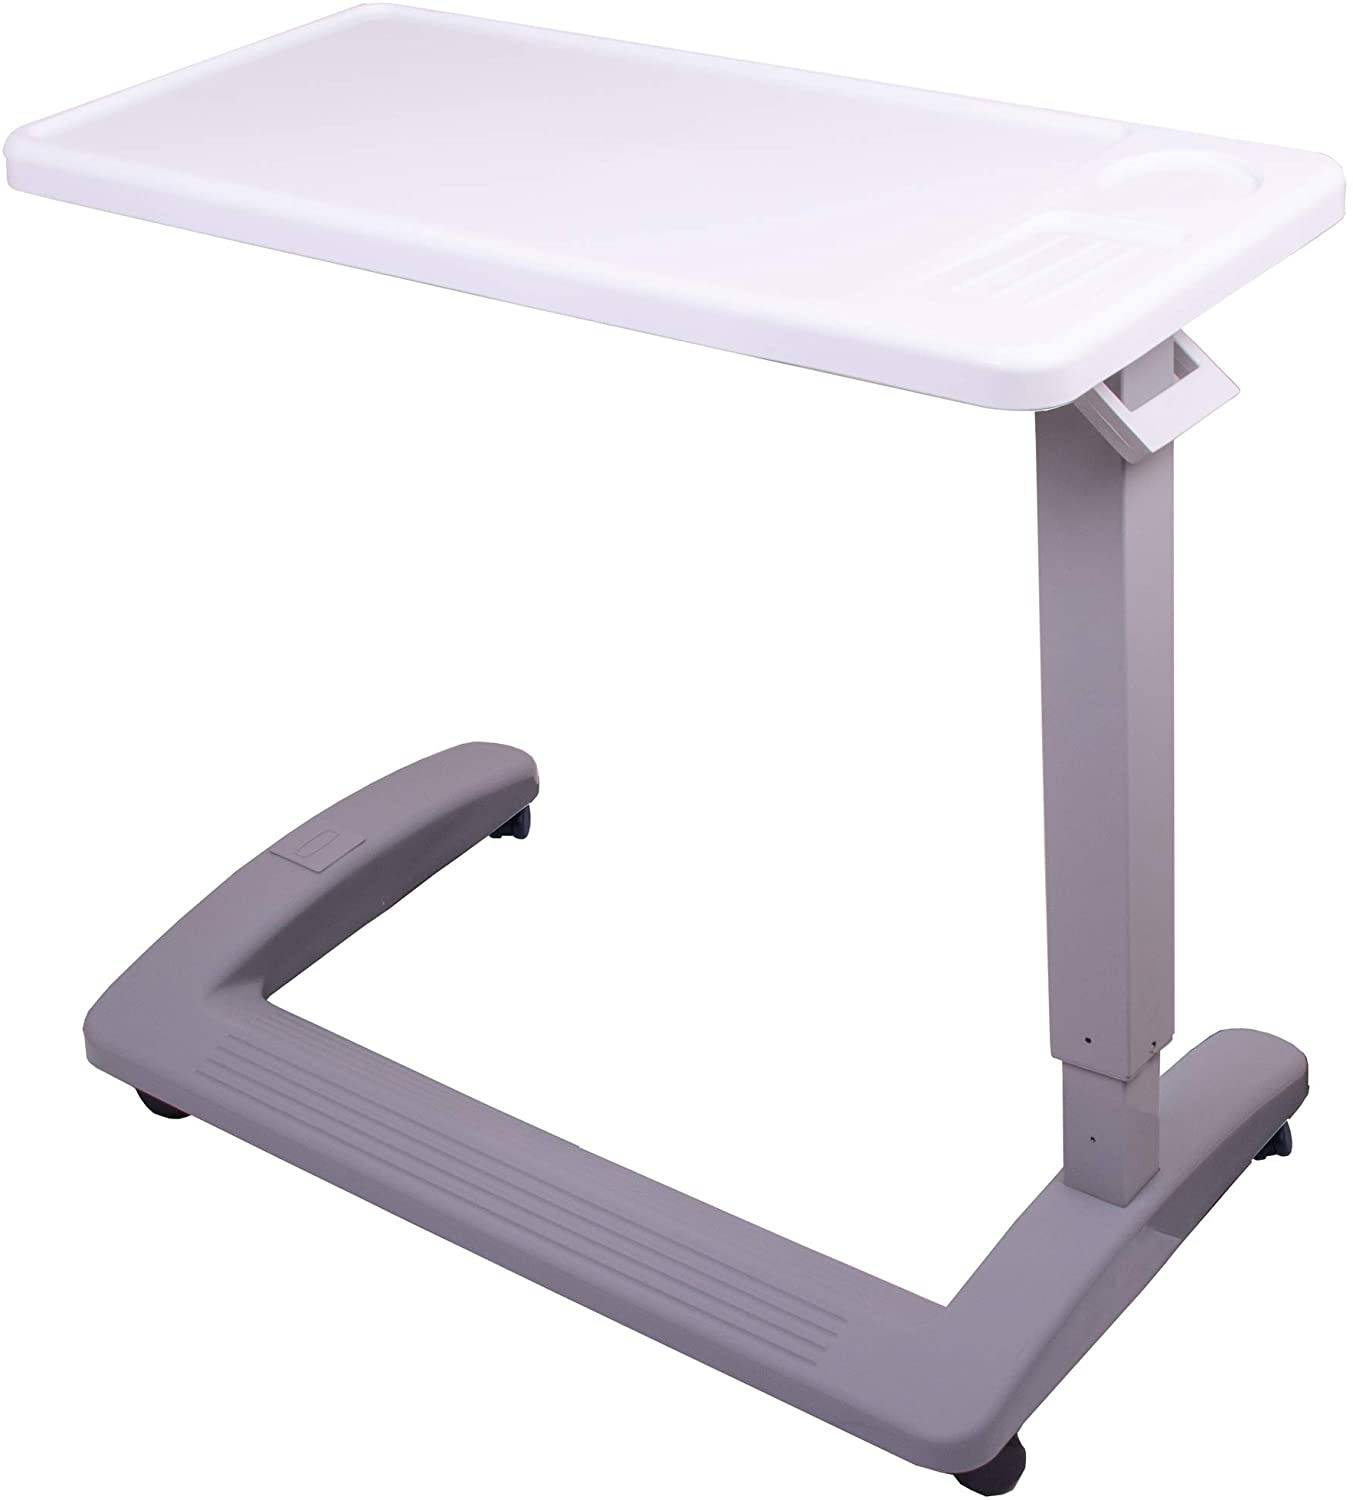 Overbed Hospital Bed Table Swivel Wheels Adjustable Height Cup Holder C-base New